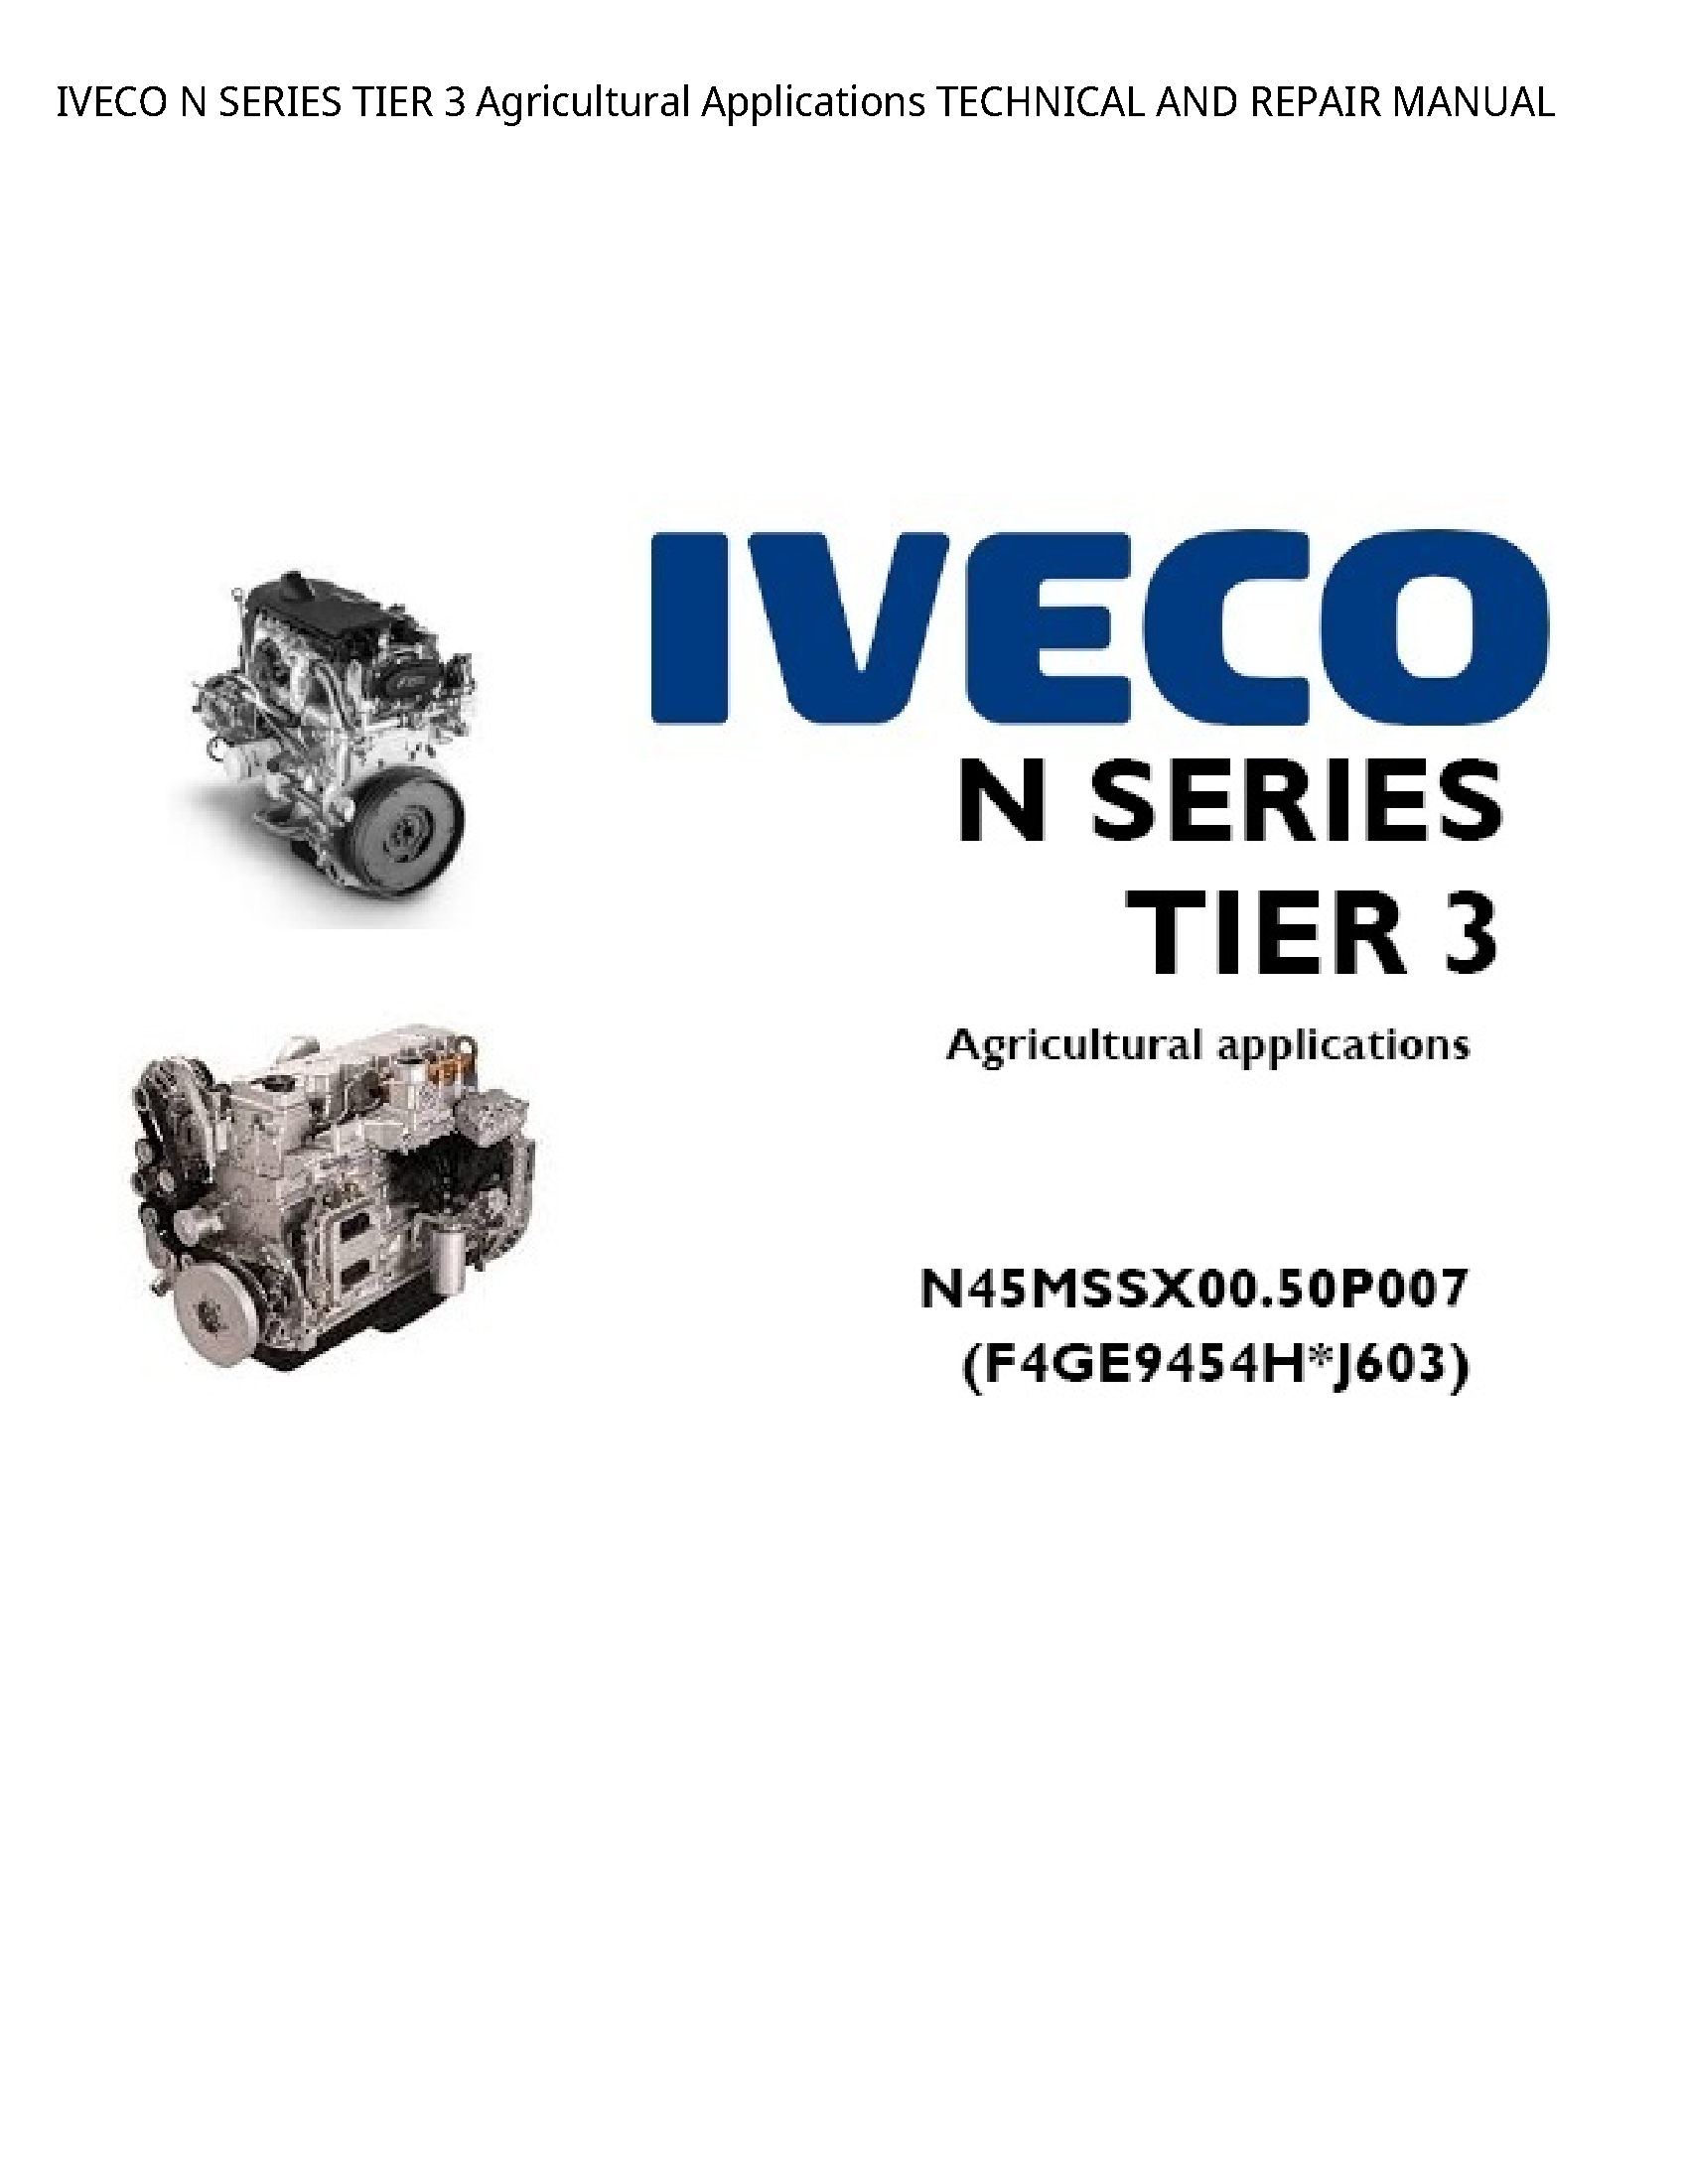 Iveco 3 SERIES TIER Agricultural Applications TECHNICAL AND REPAIR manual